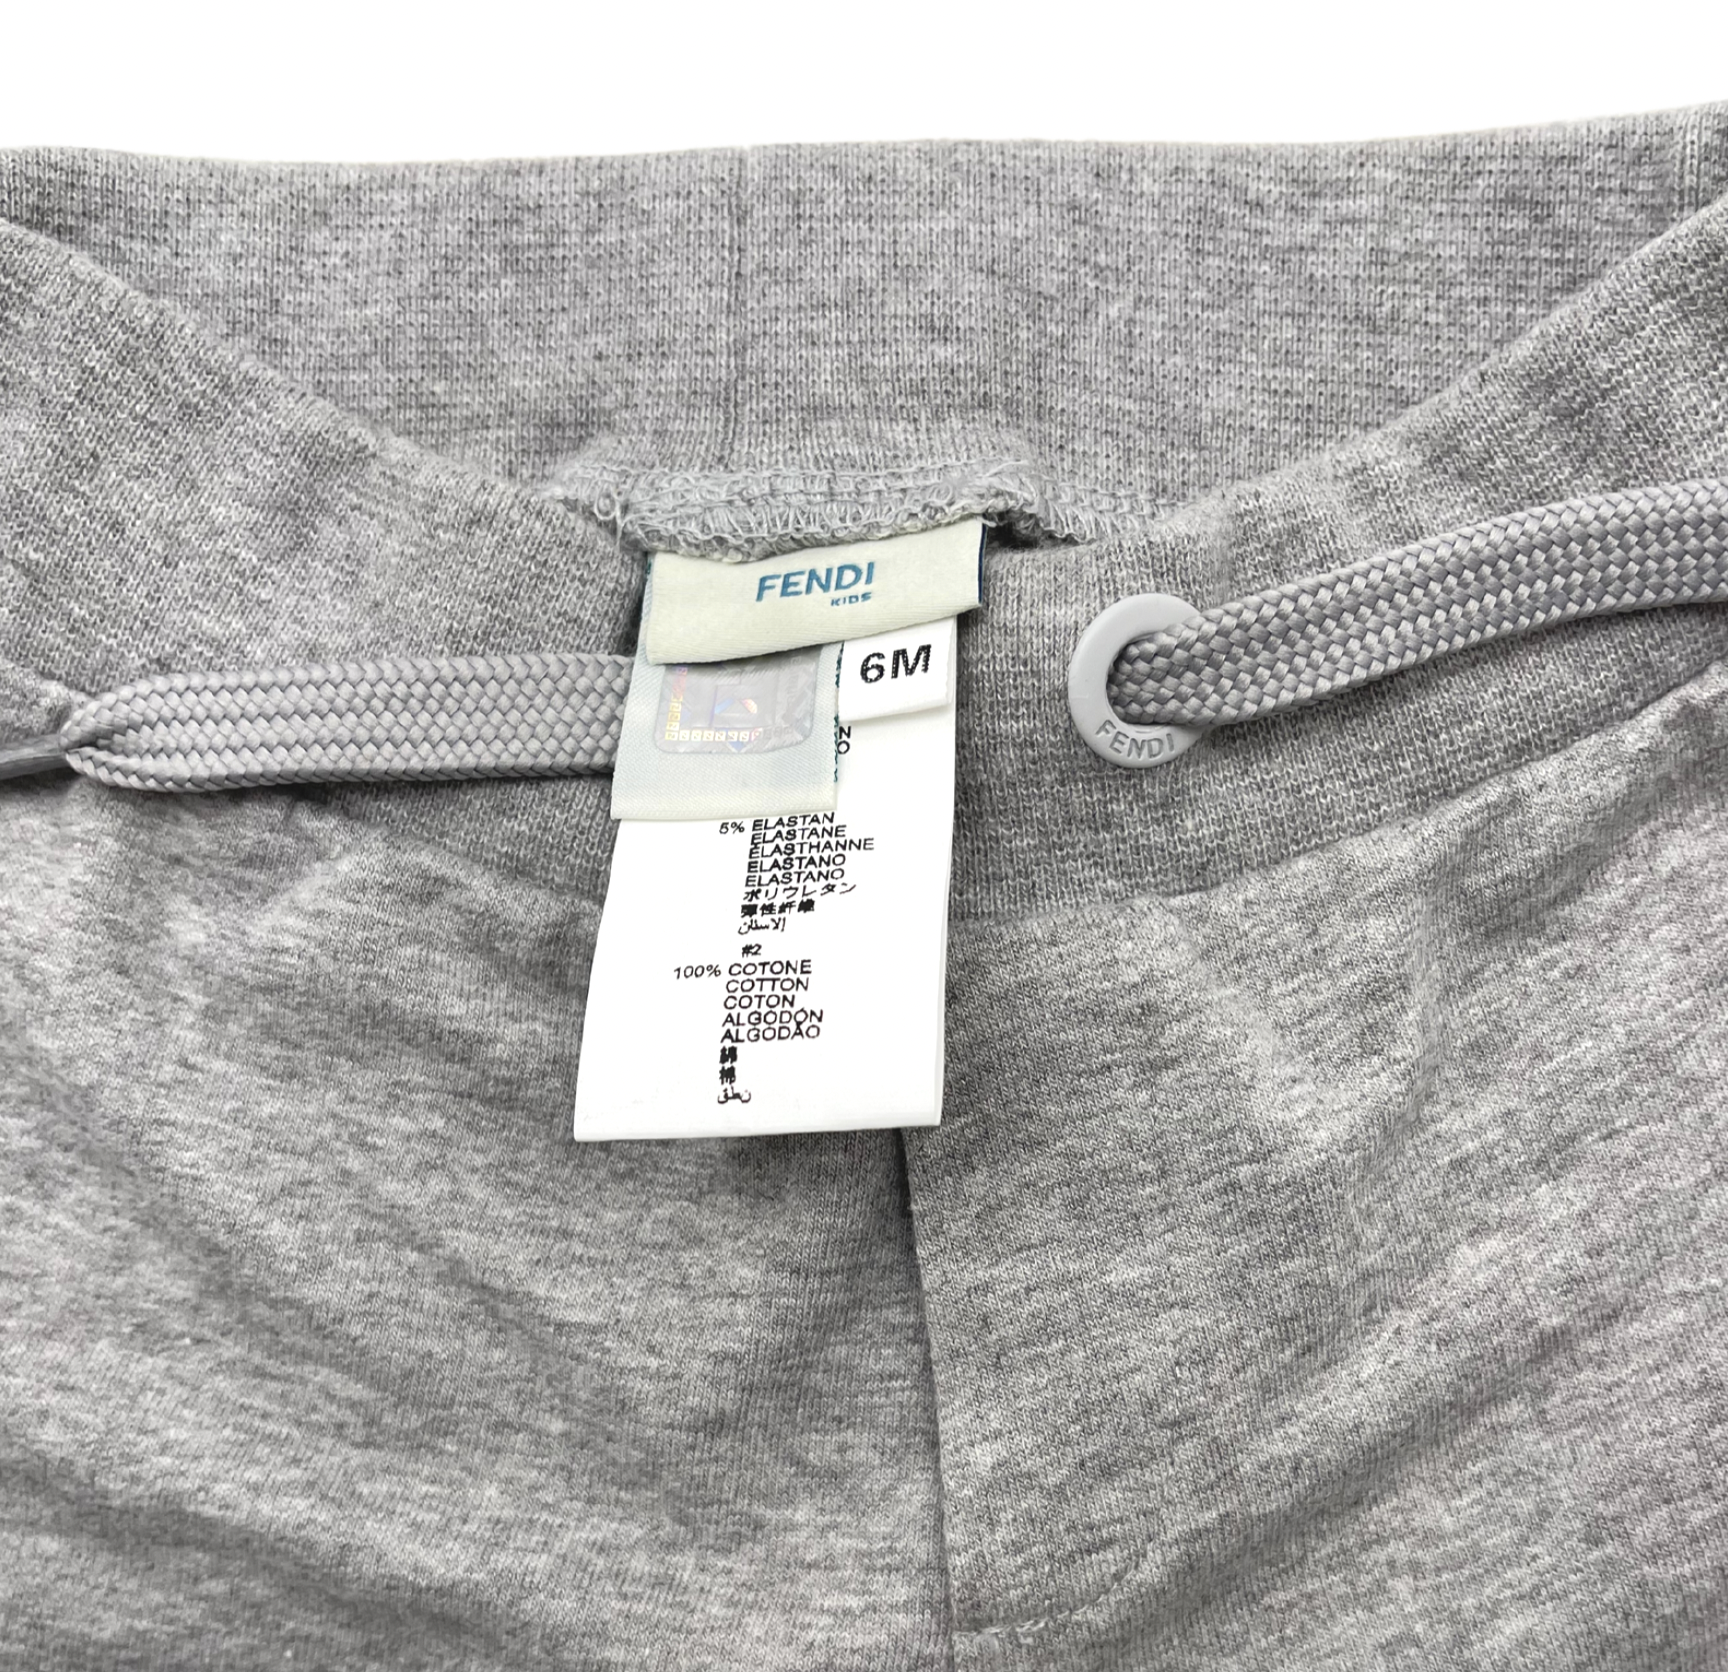 FENDI - Gray shorts with small logo on the back pocket - 6 months